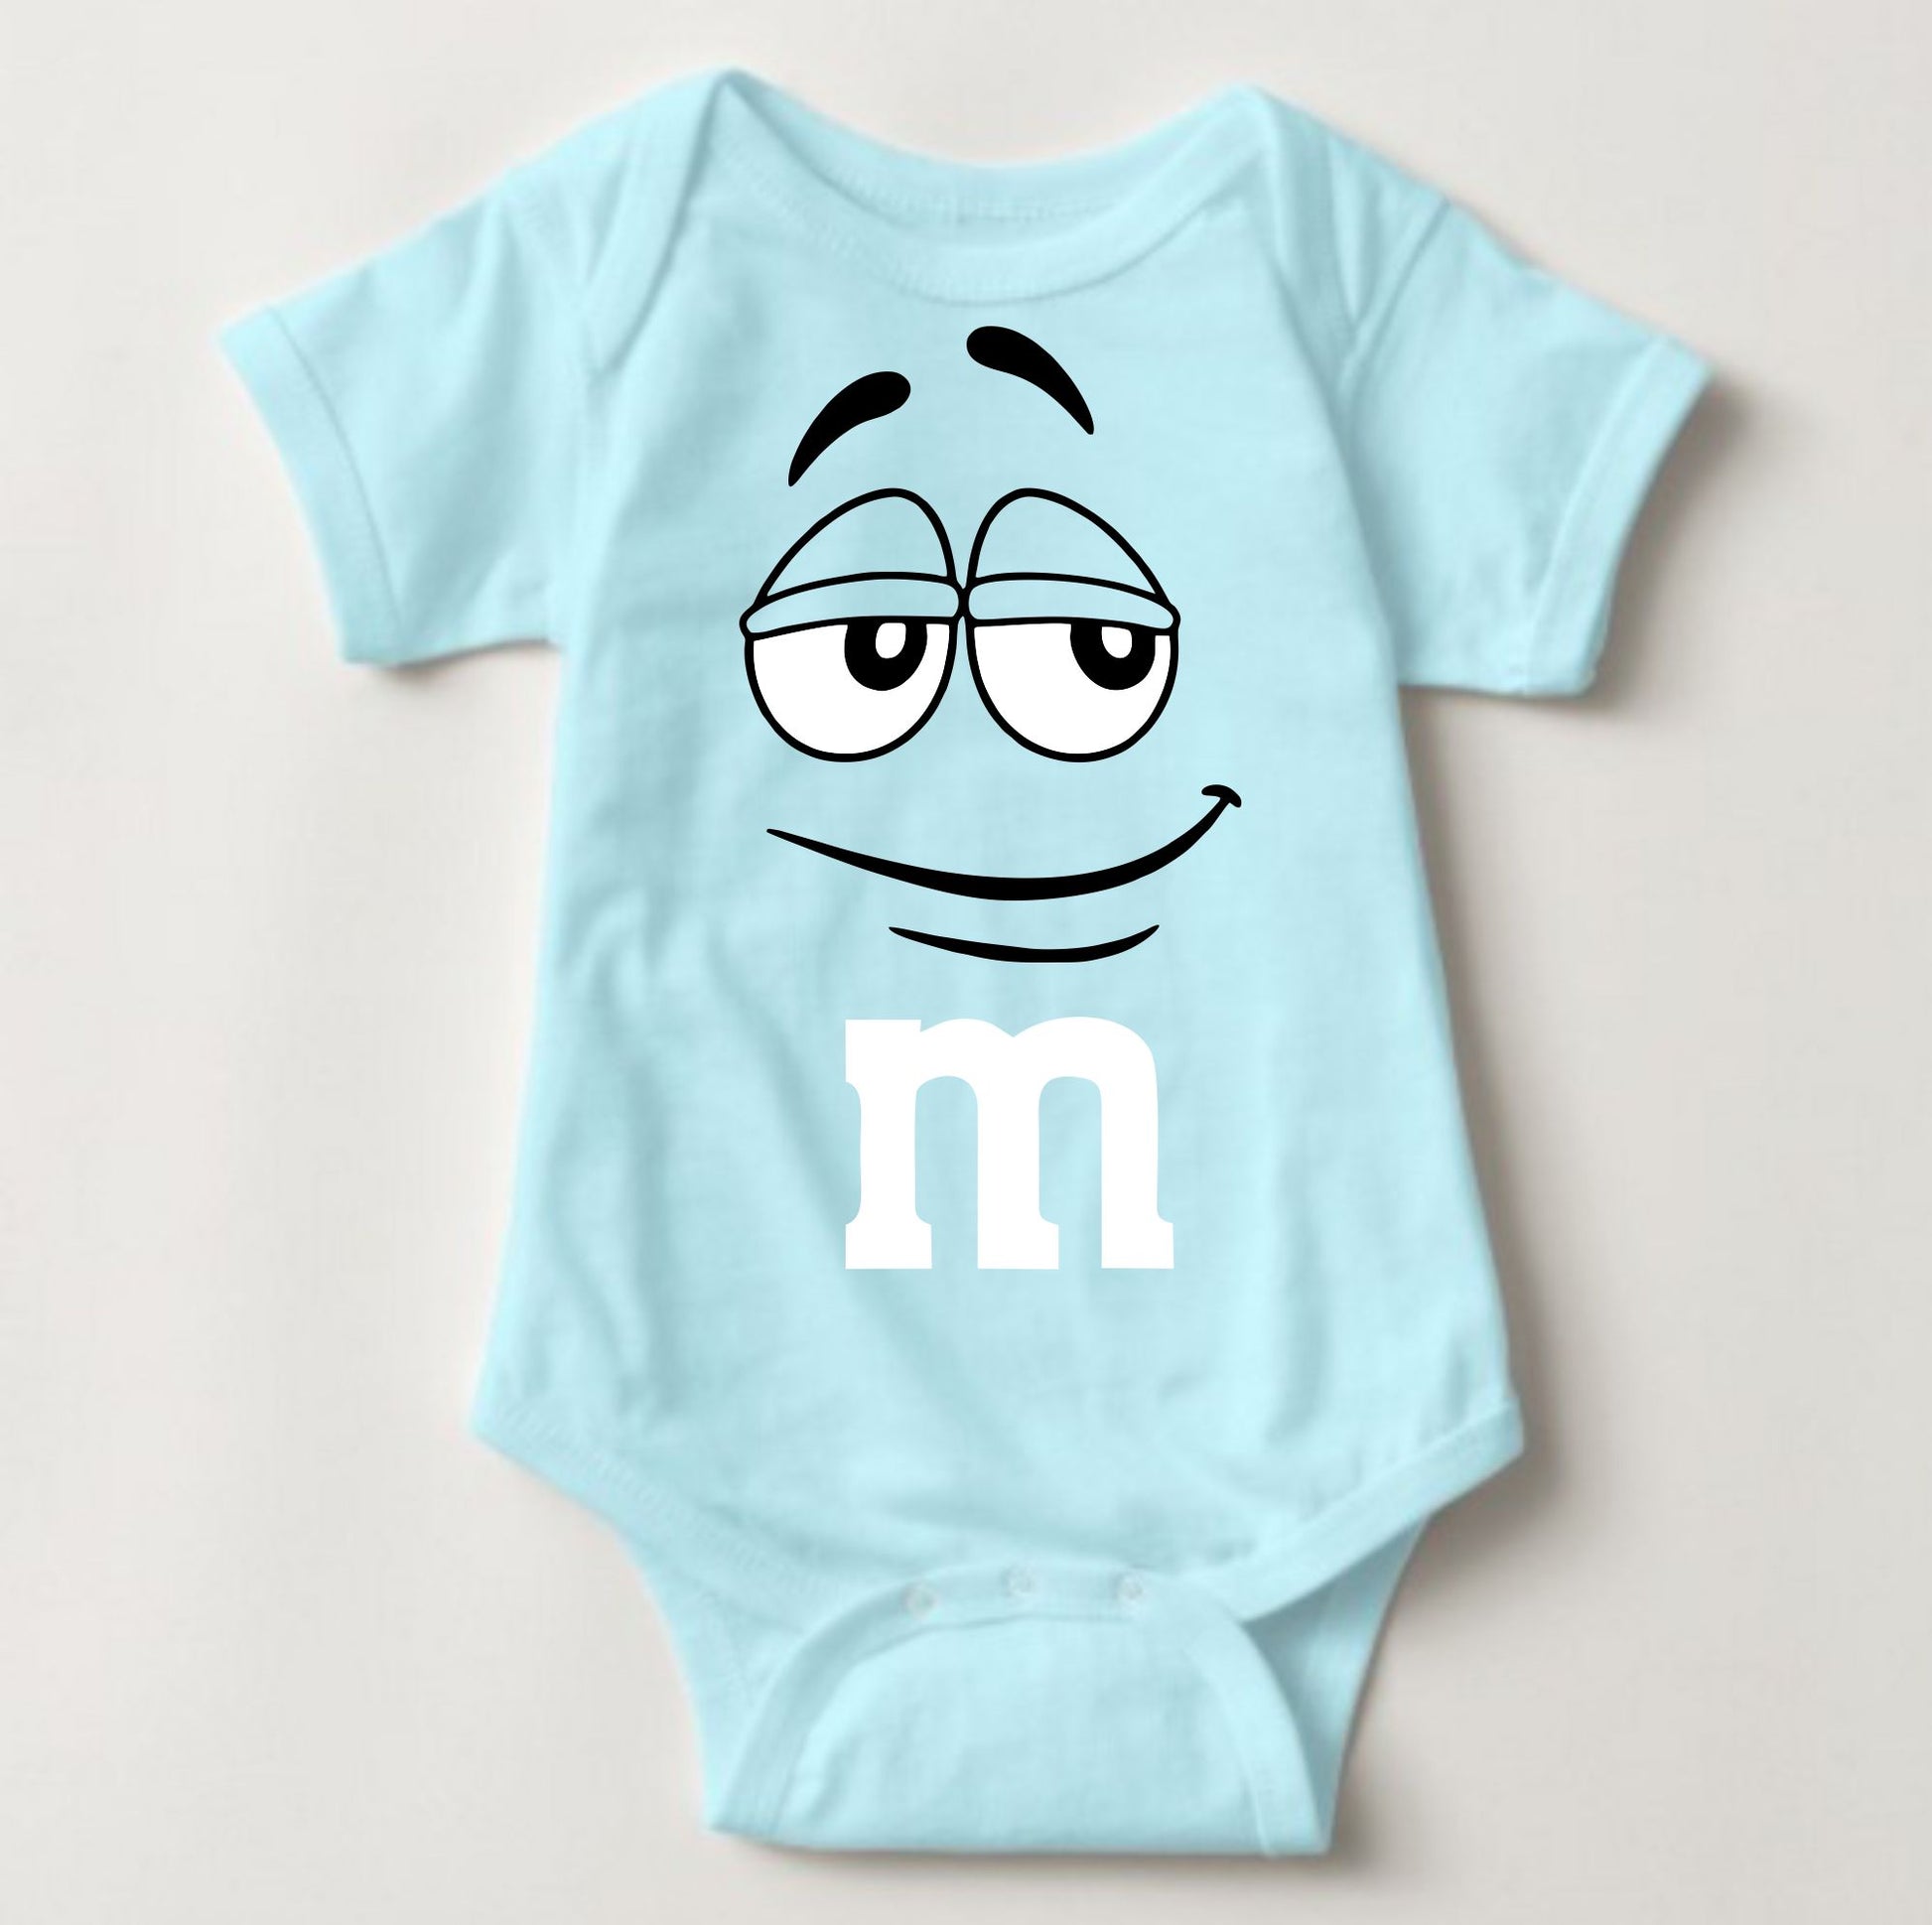 Baby Character Onesies - M&M's Light Blue - MYSTYLEMYCLOTHING